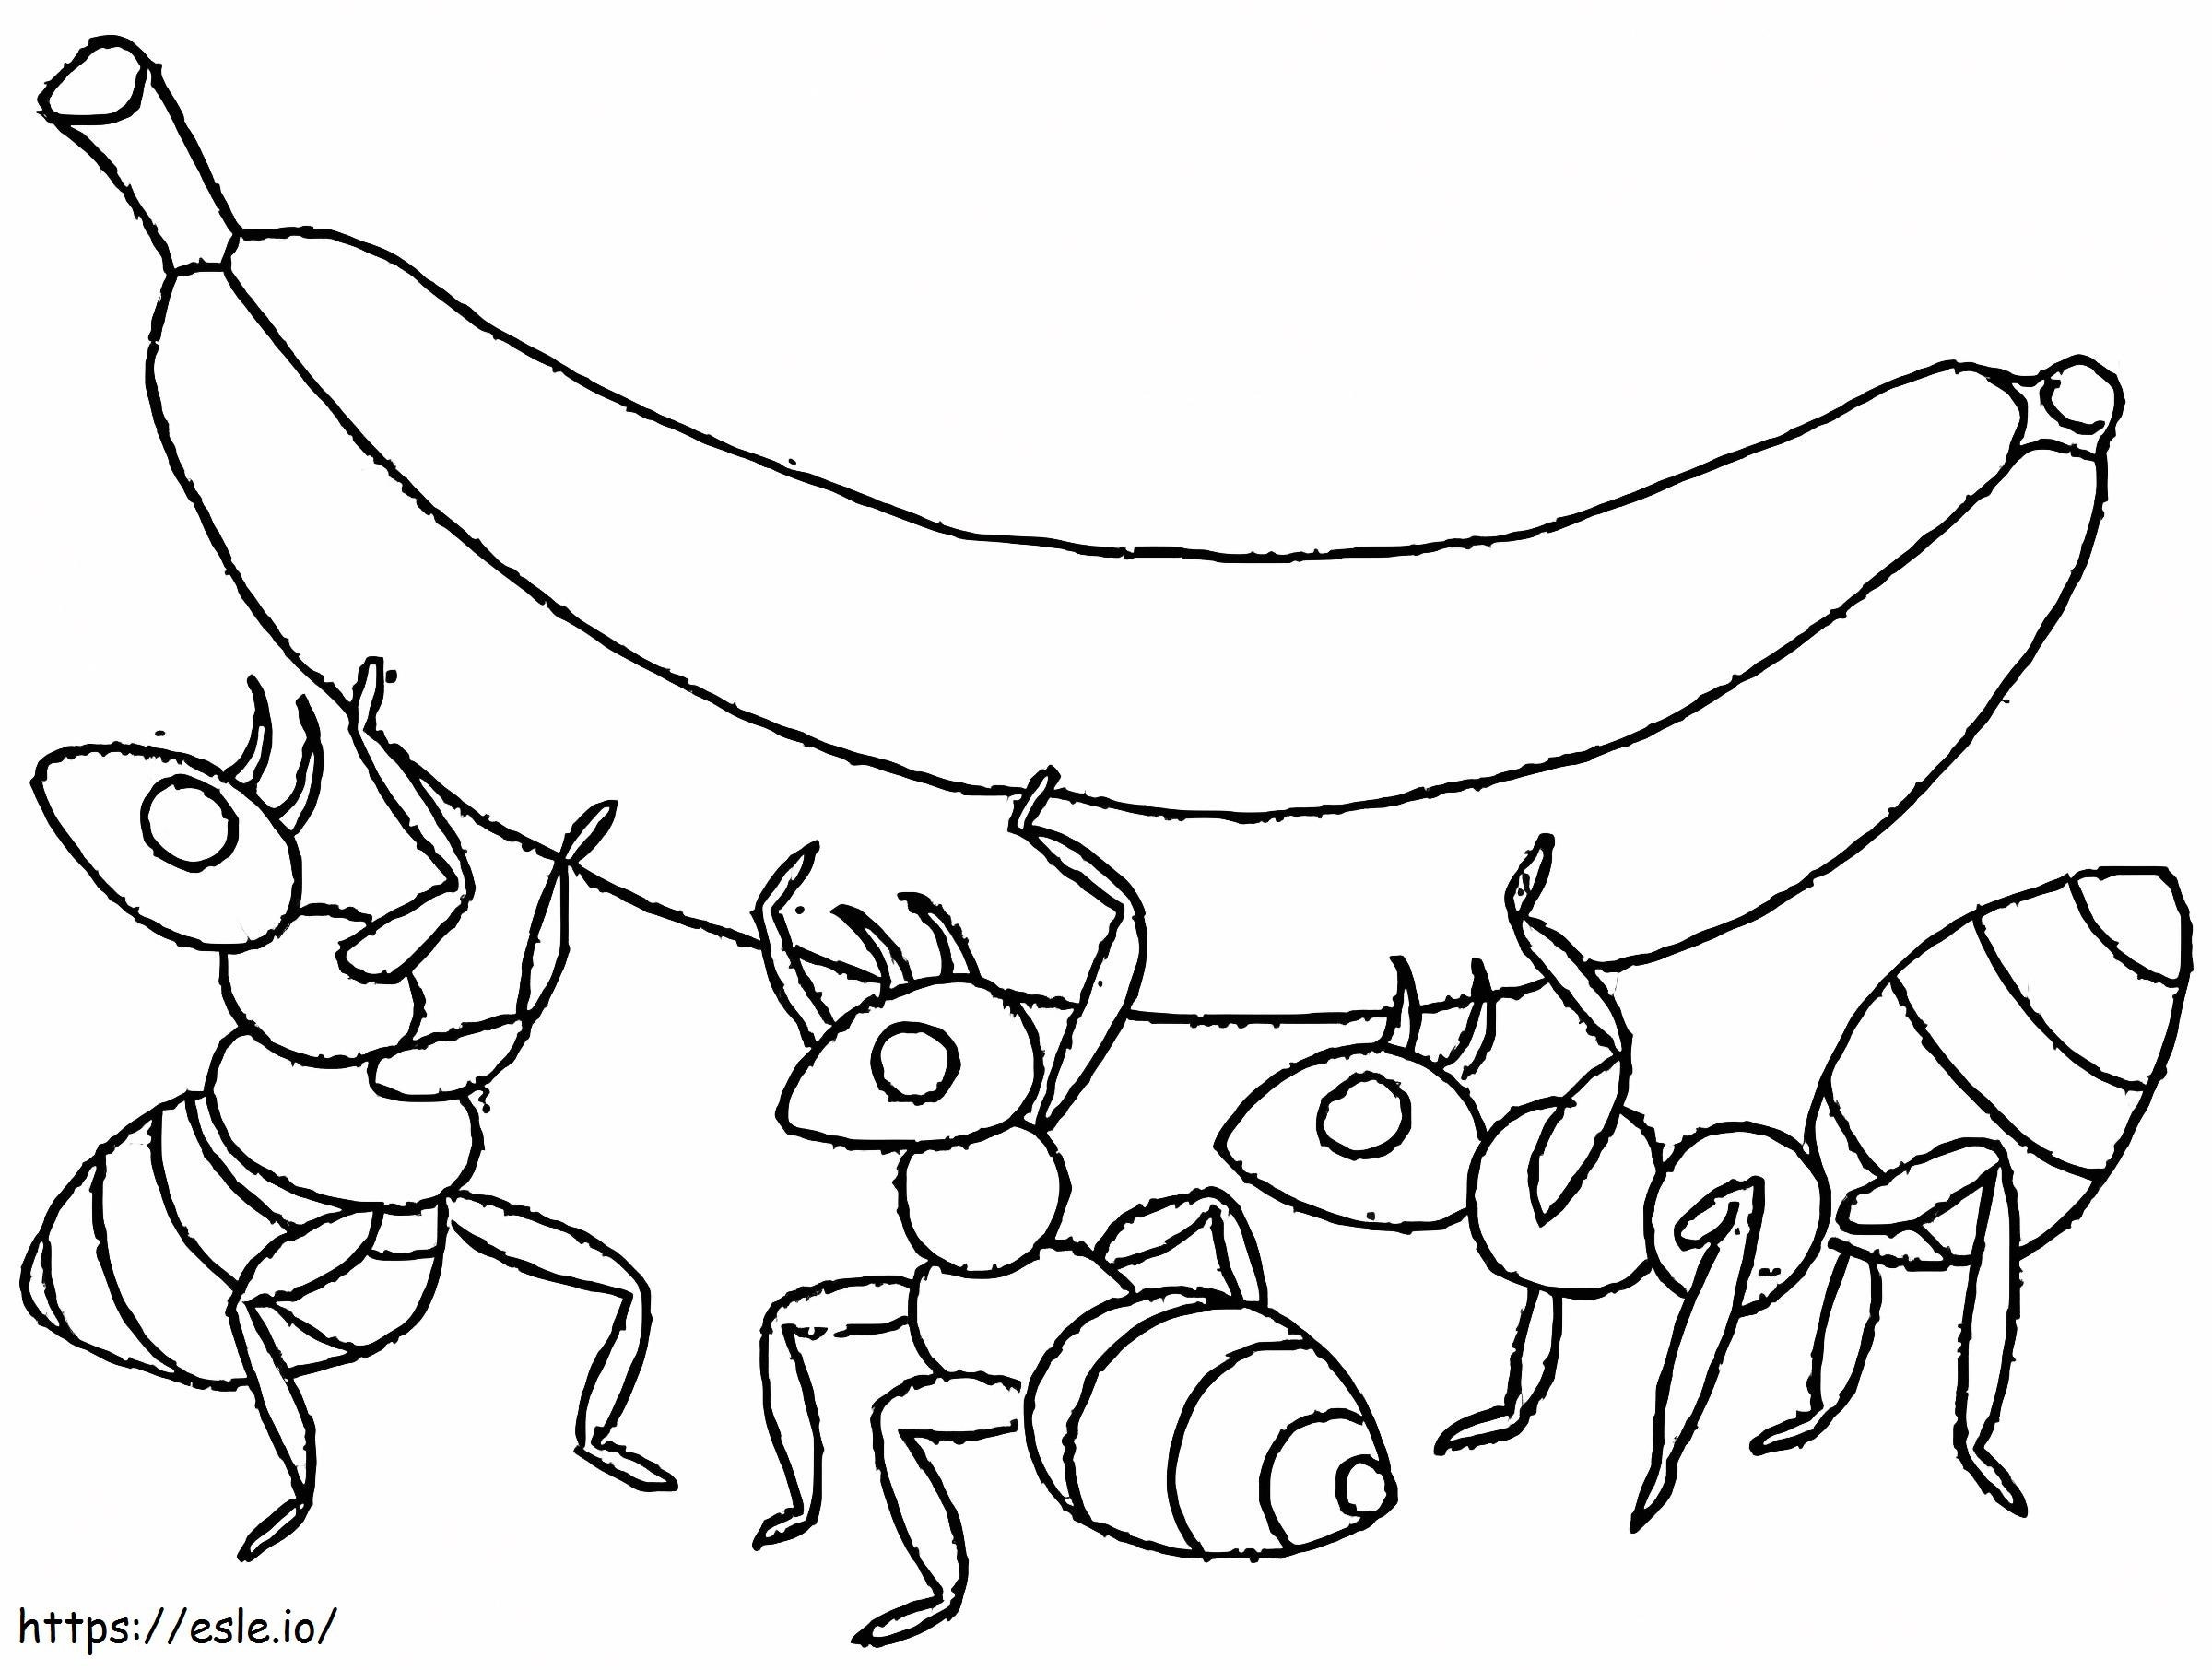 Banana In Ant coloring page